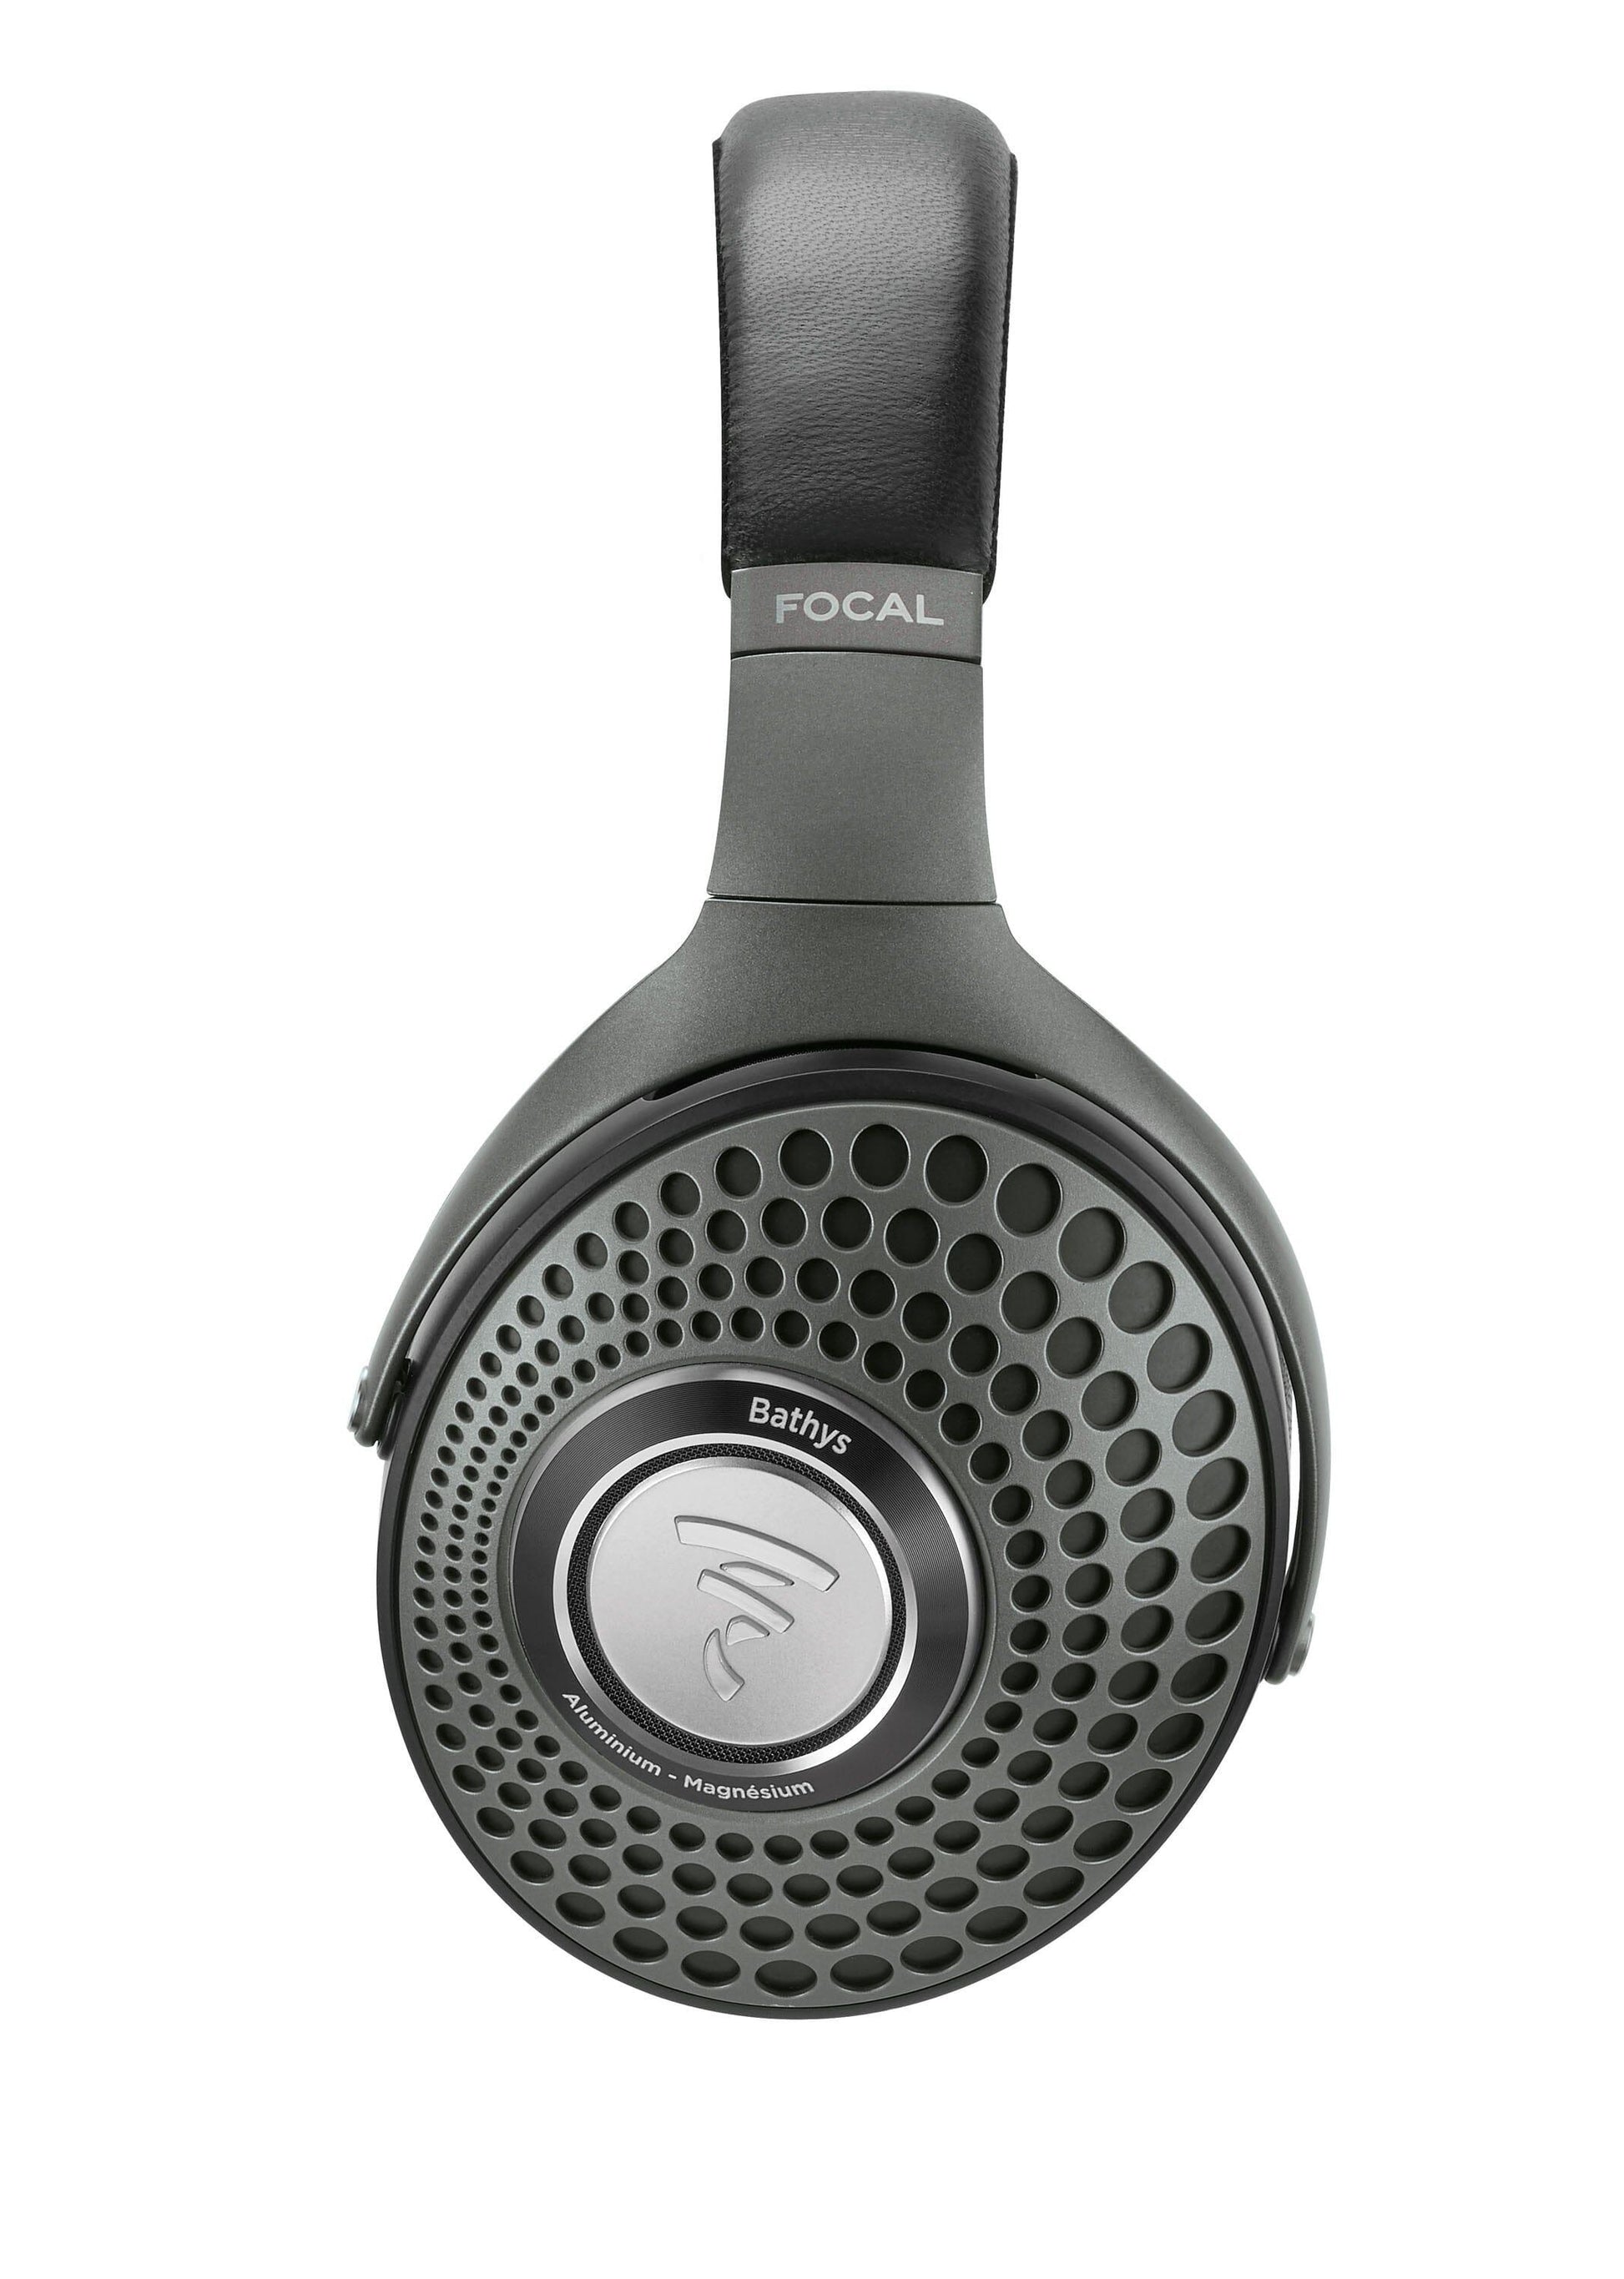 Left-side view of Focal Bathys wireless noise-cancelling bluetooth audiophile headphones